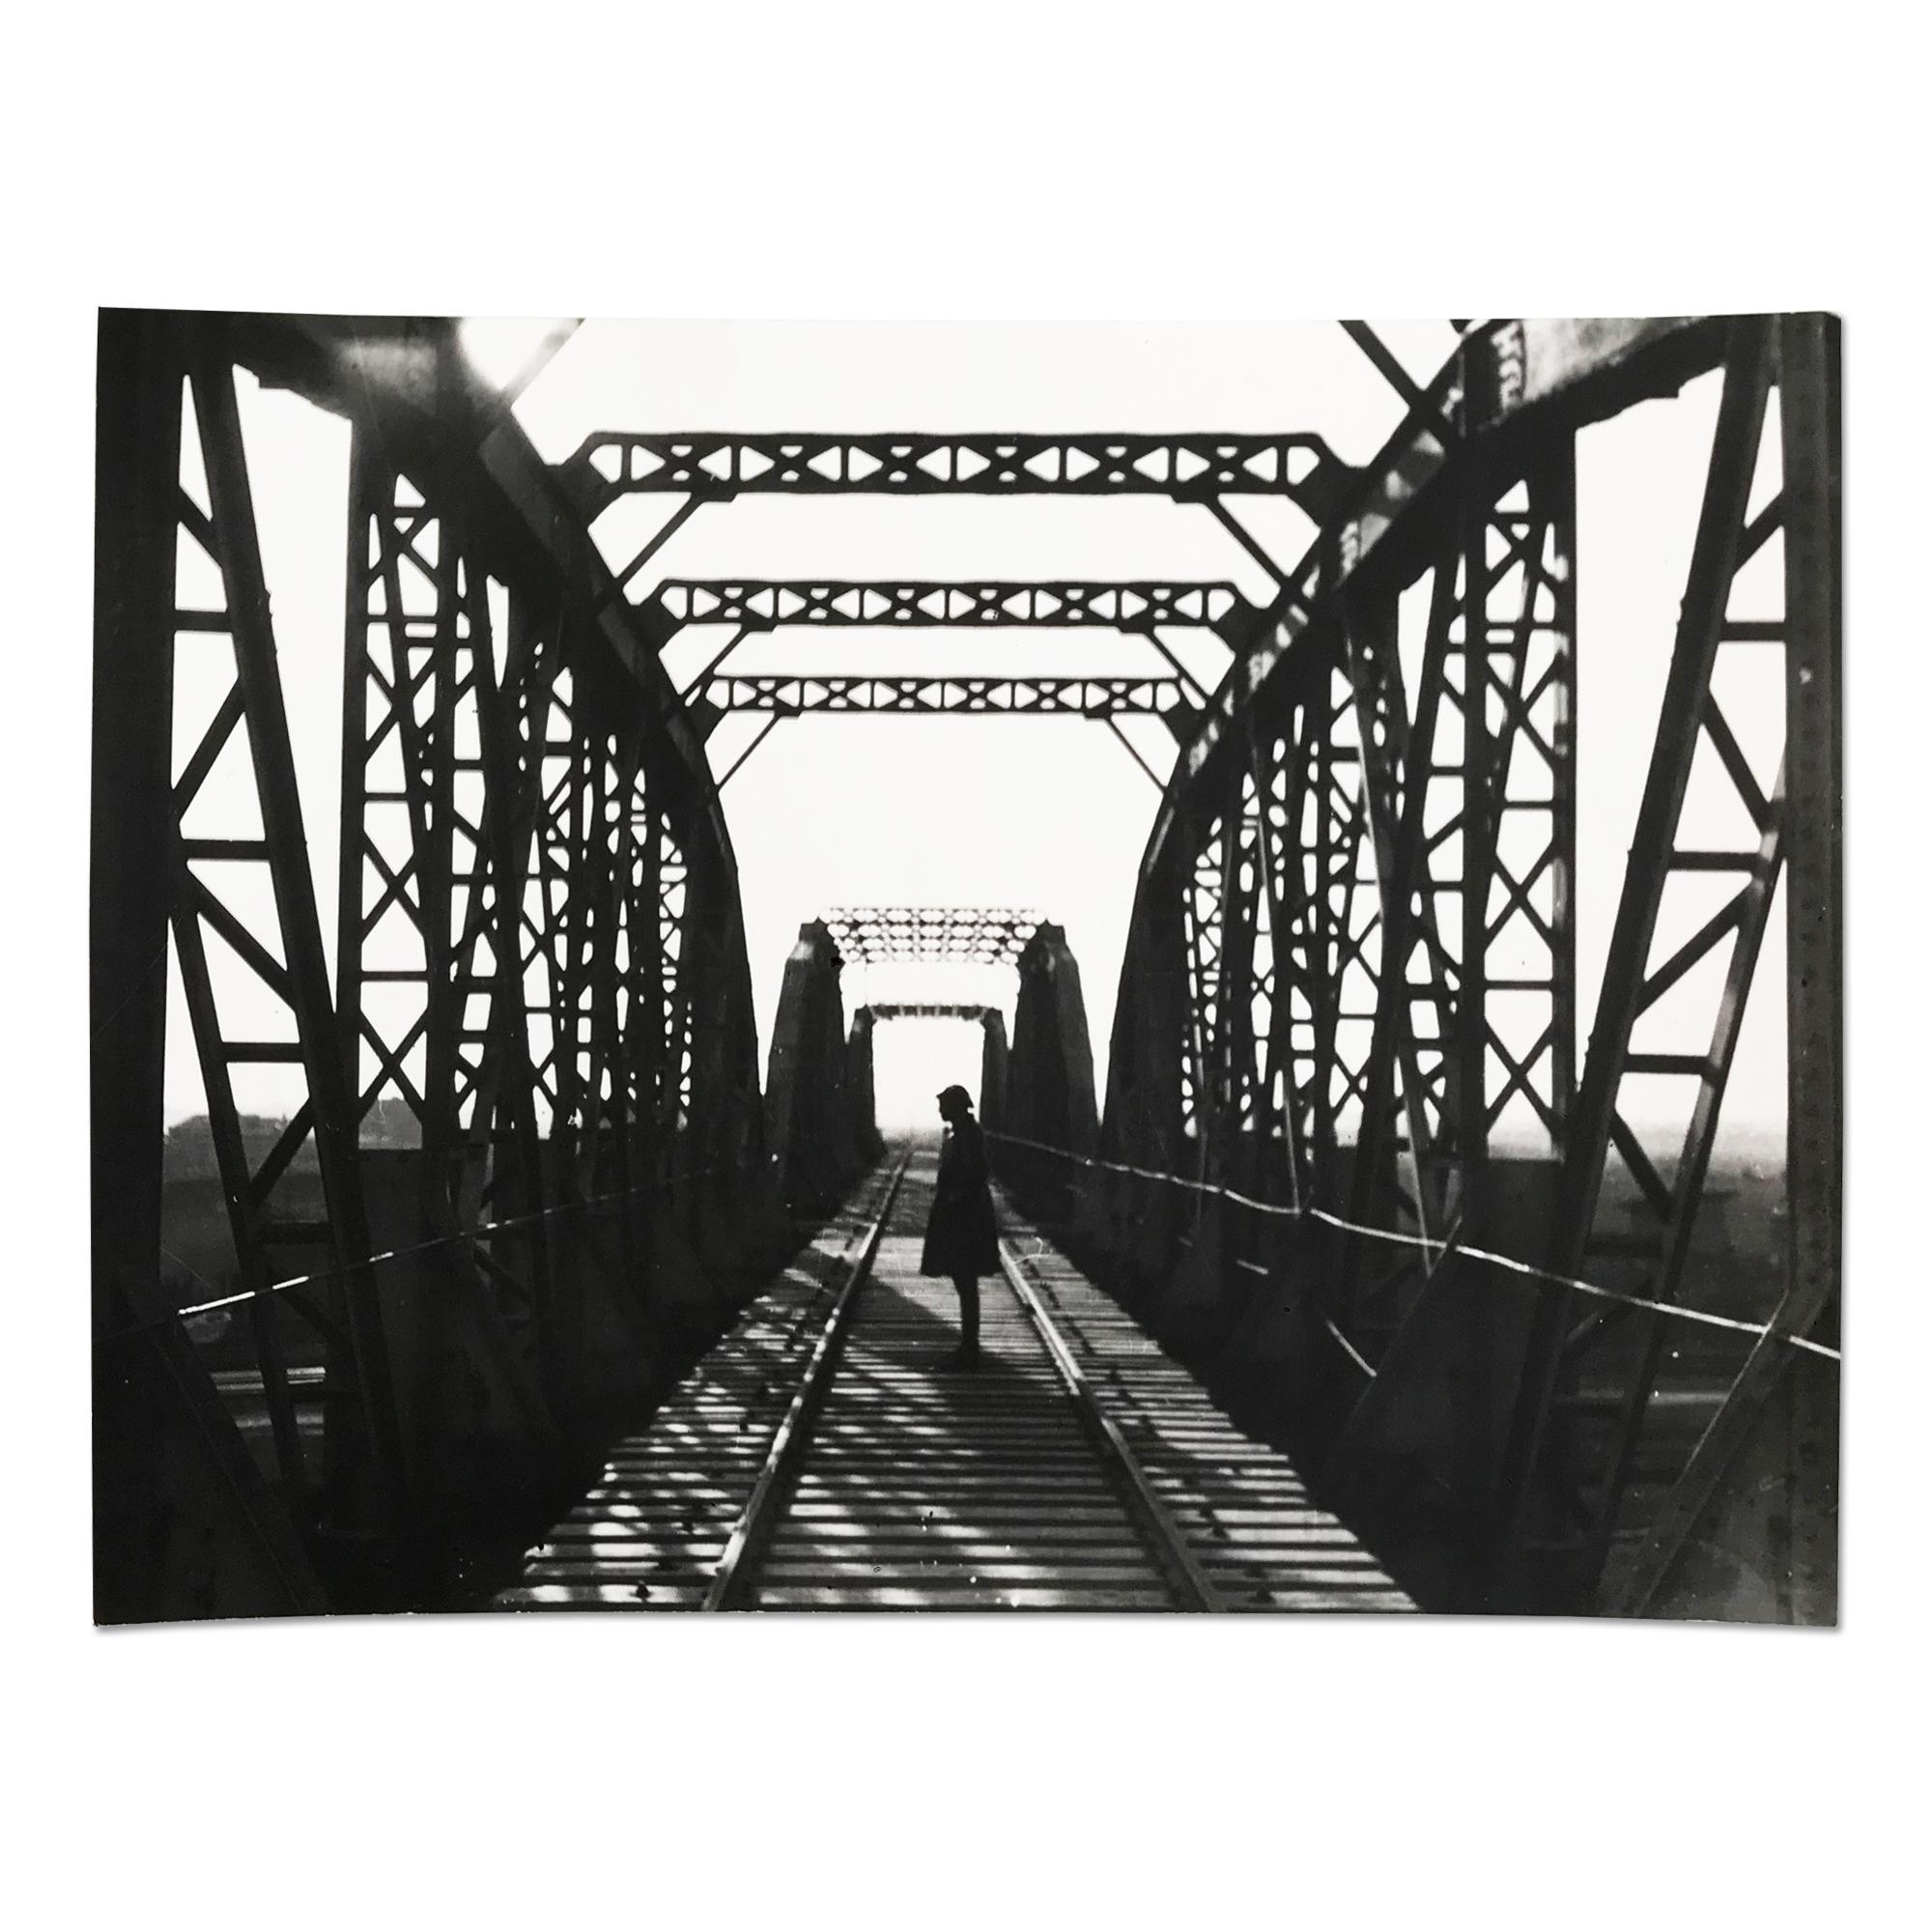 Alexander Rodchenko (St. Petersburg 1891- 1956 Moscow) 
Railway Bridge, 1987 (circa 1925)
Medium: Silver gelatin print (posthumous)
Production: produced in 1987, from the original negative from around 1925
Dimensions: 18 x 24 cm 
Verso with the